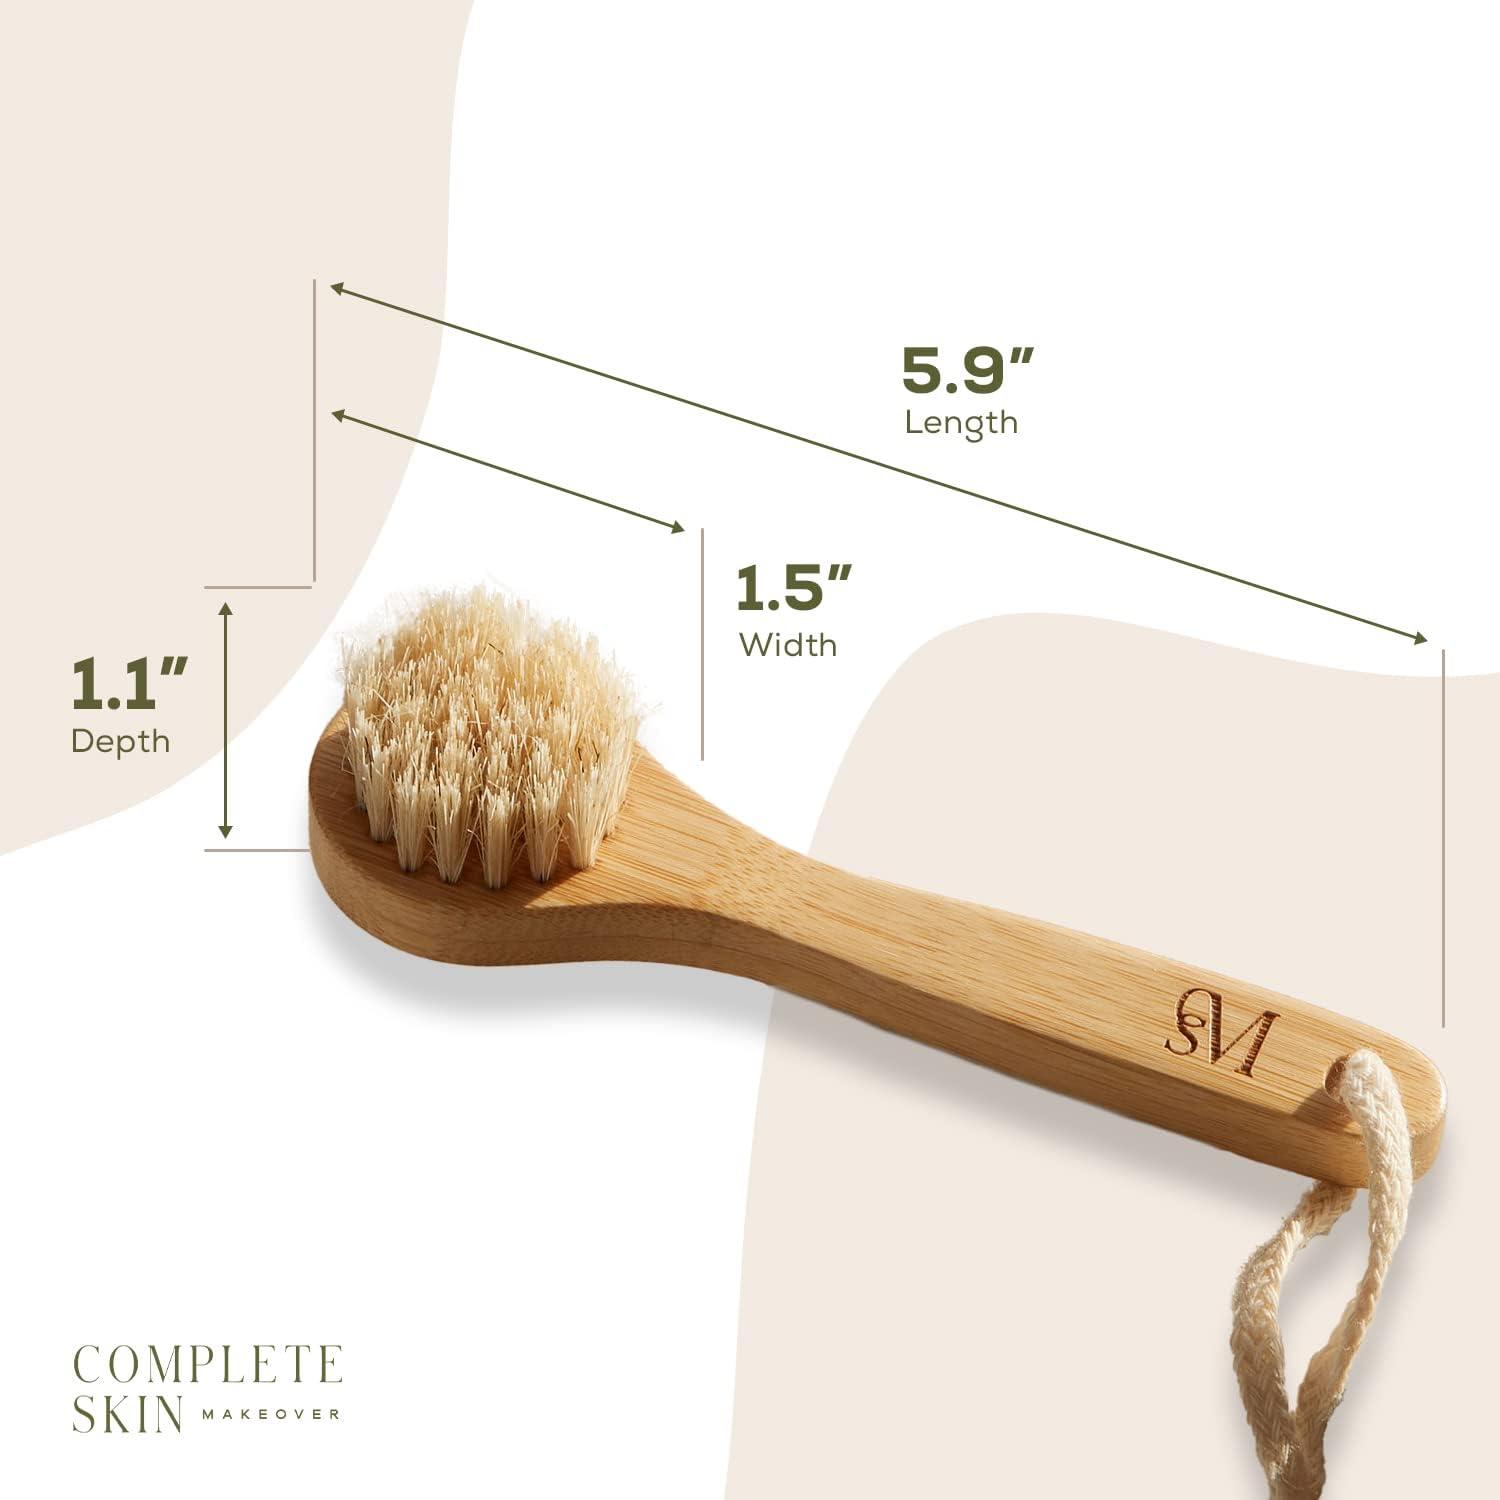 CSM Mini Dry Brush - Natural Bristle Small Body Brush, Exfoliating Facial Cleansing Brush for Soft Skin and Other Sensitive Areas Like Your Neck, Ches